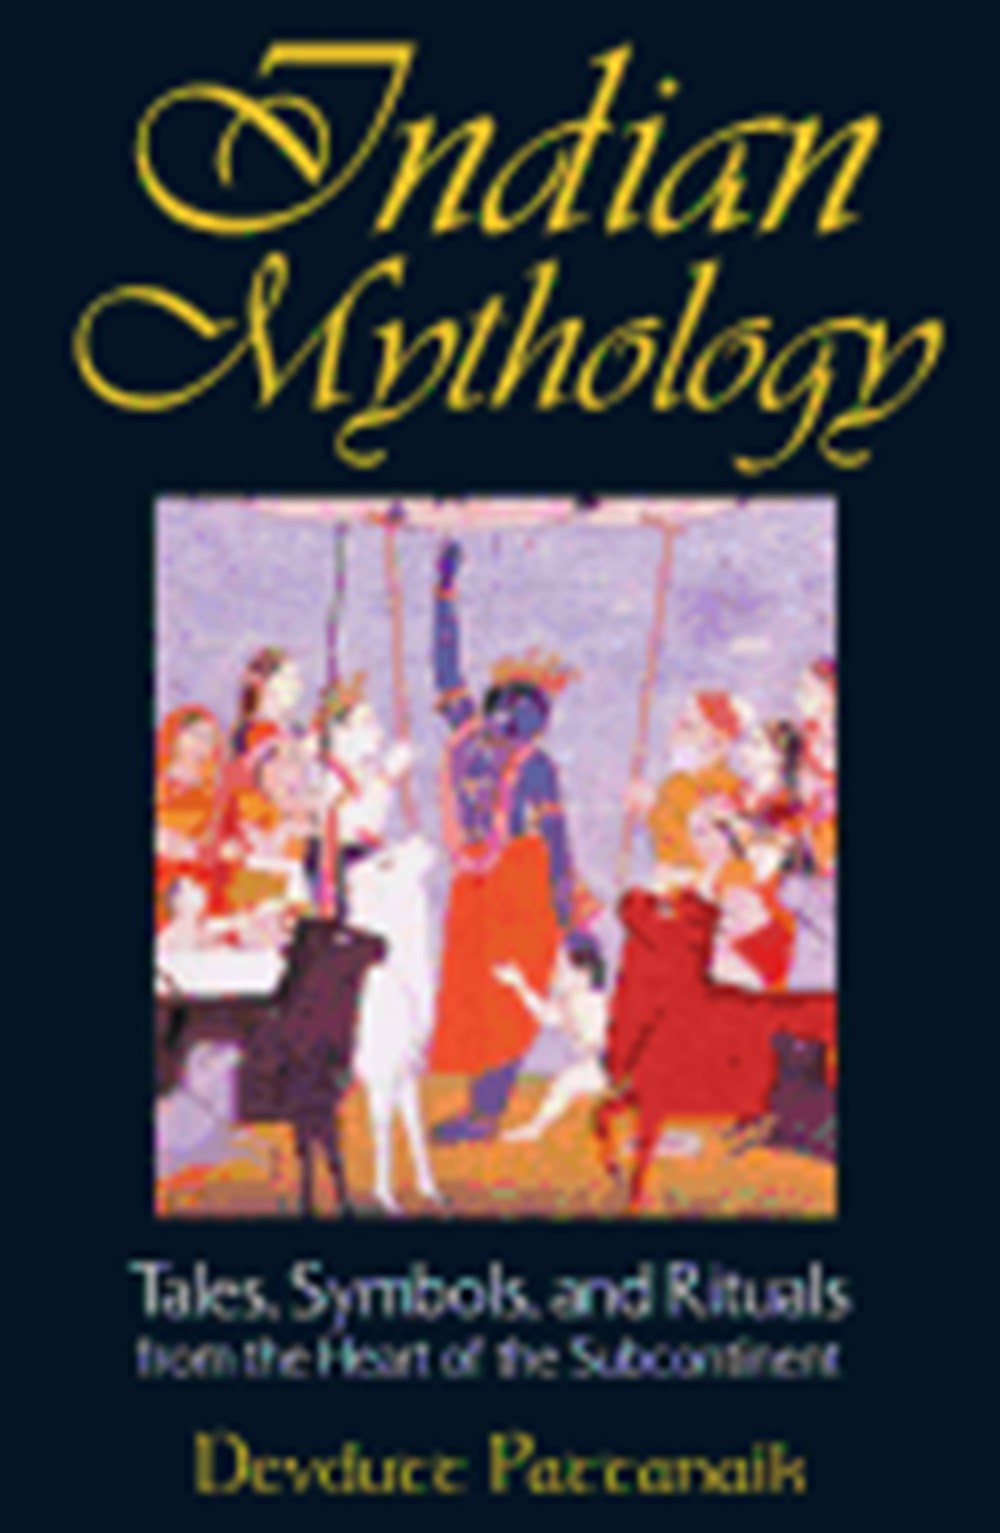 Indian Mythology: Tales, Symbols, and Rituals from the Heart of the Subcontinent (Original)